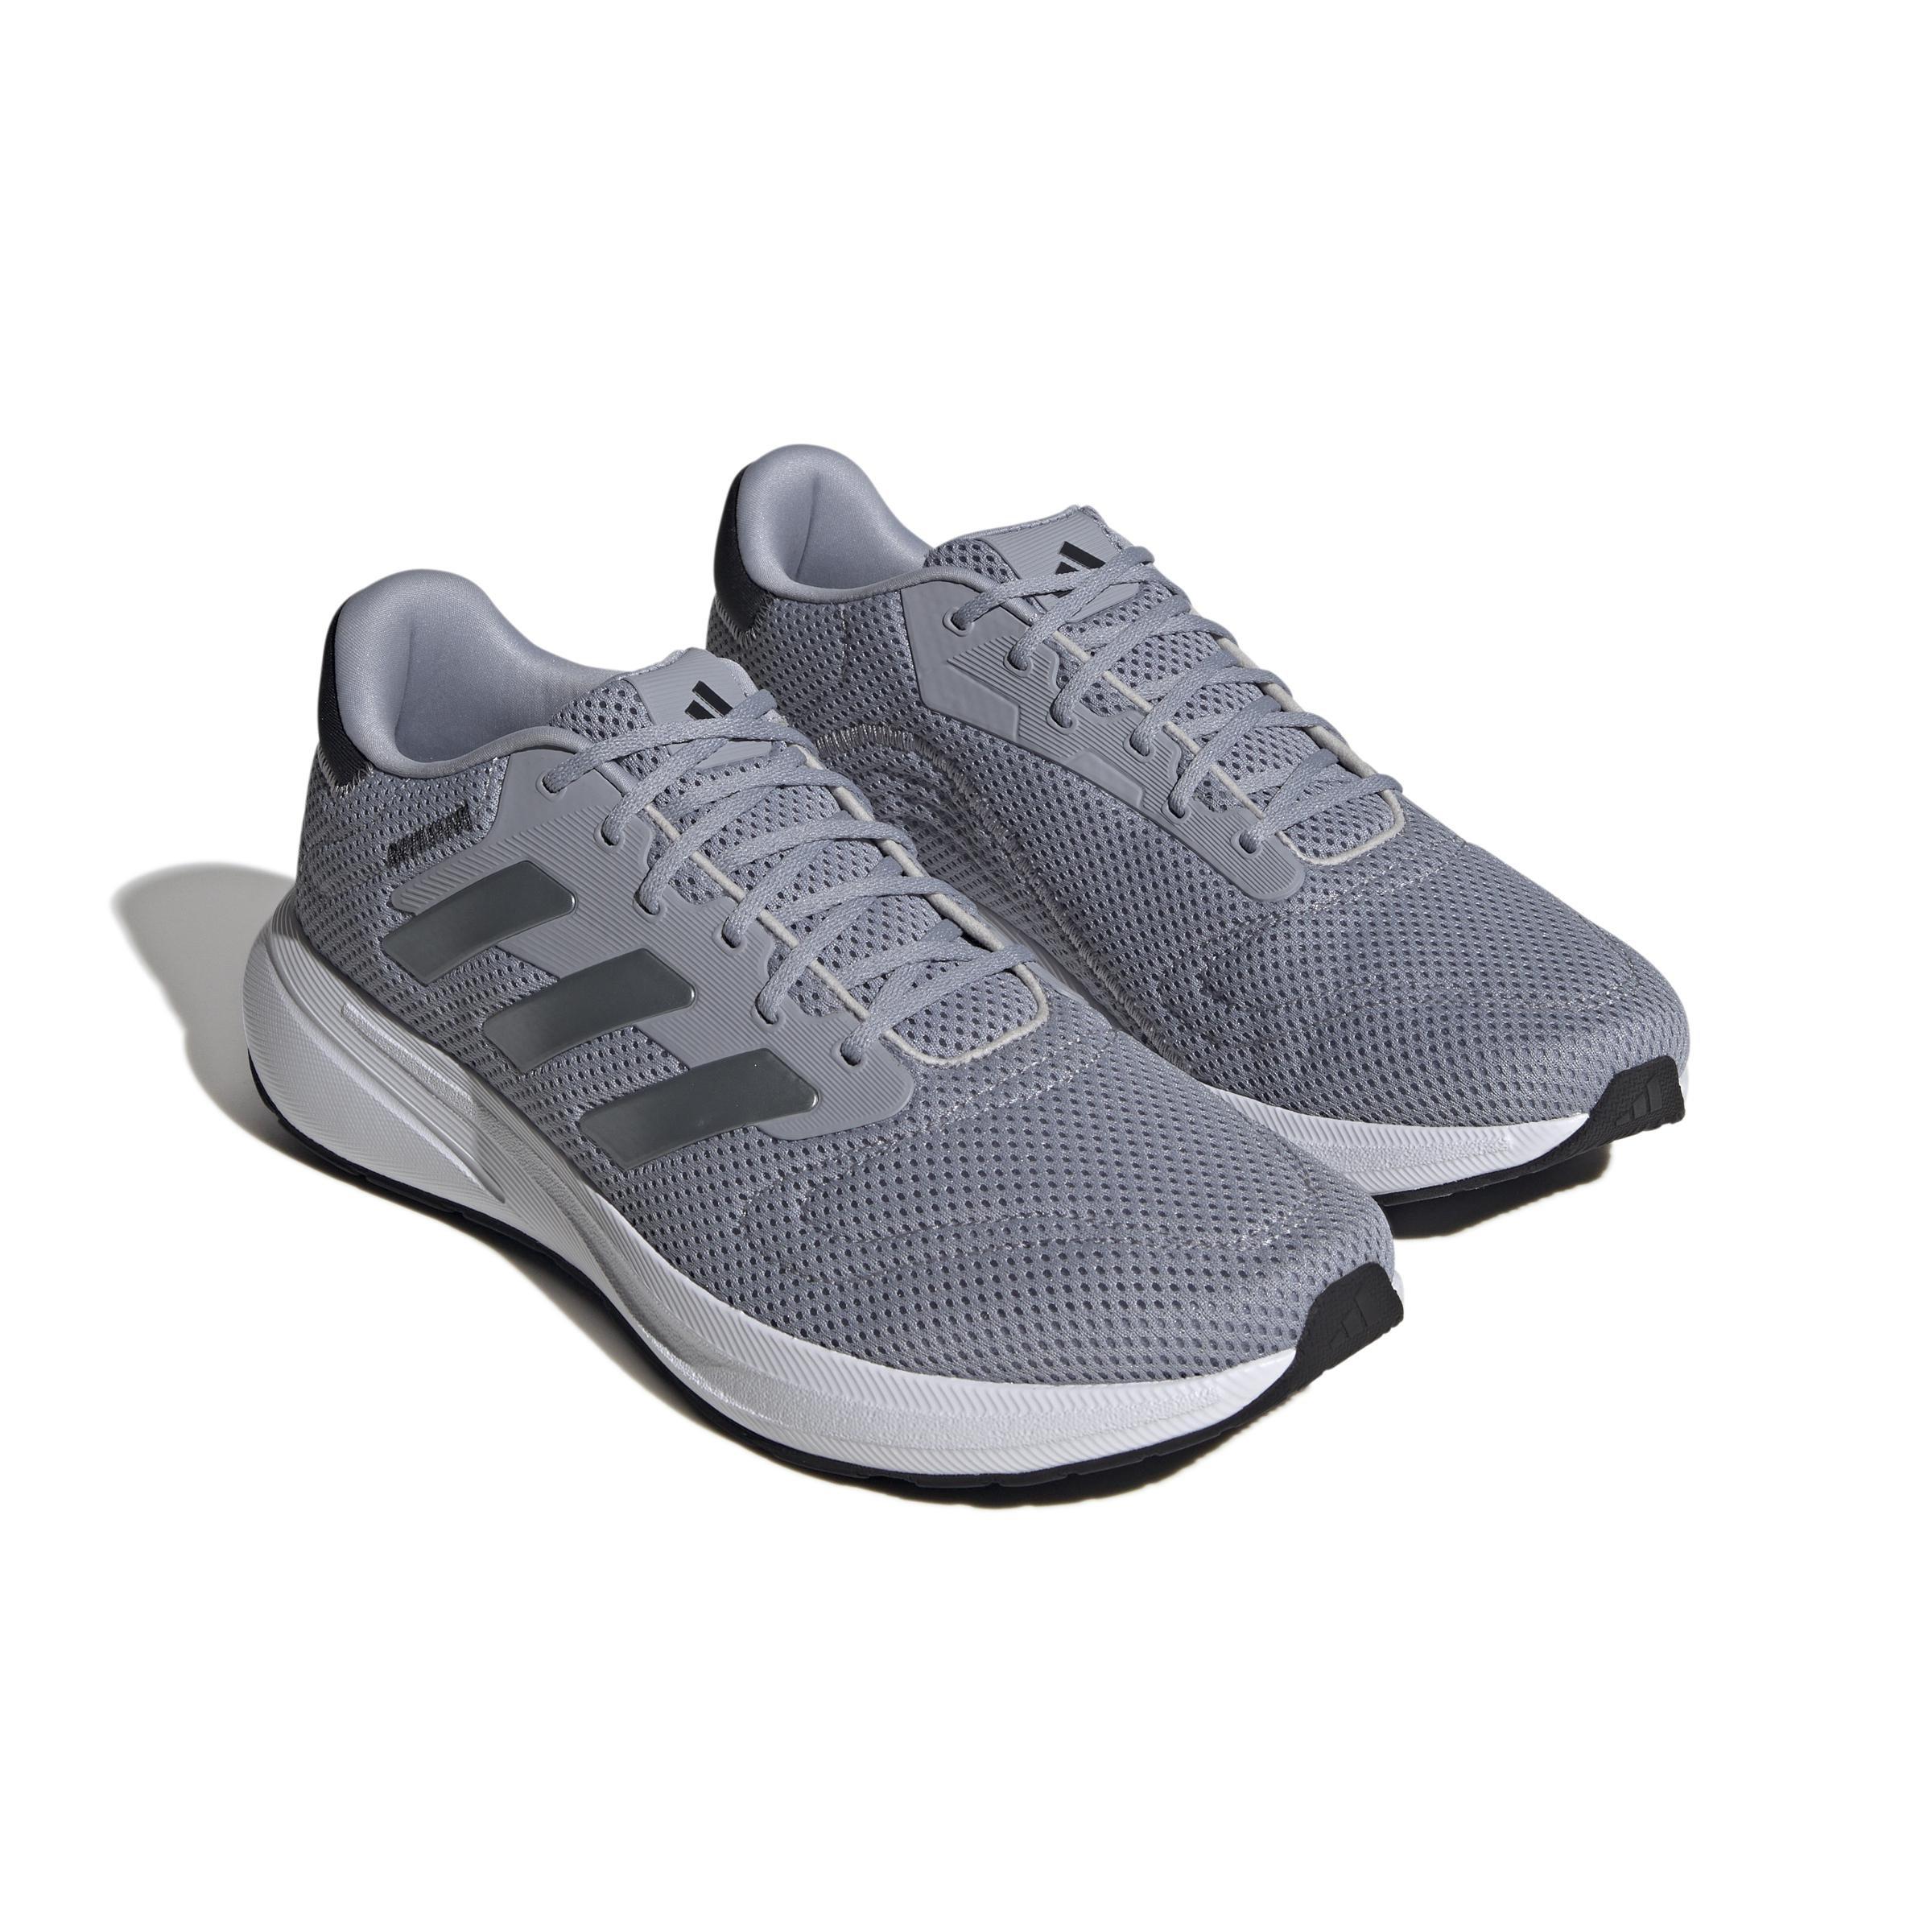 adidas - Unisex Response Runner Shoes, Silver